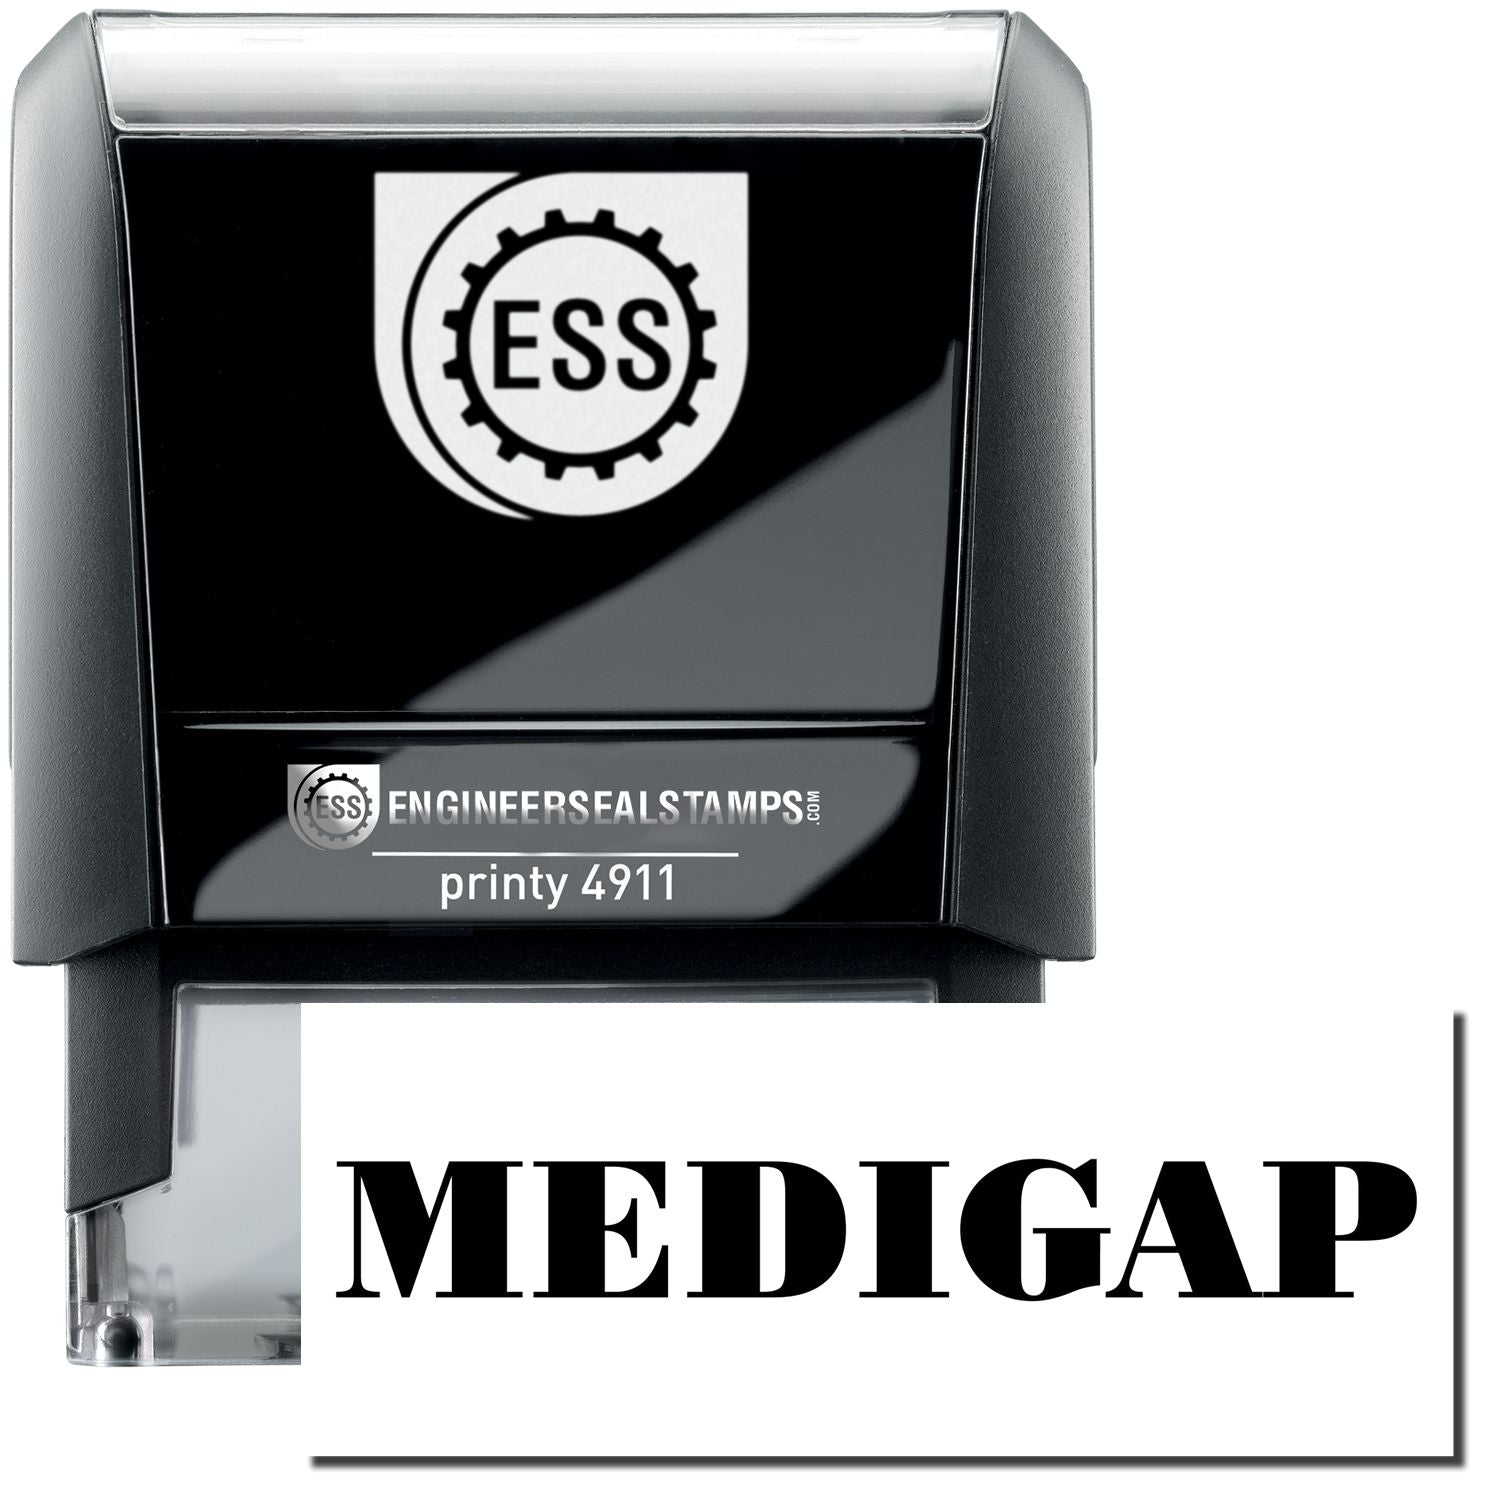 A self-inking stamp with a stamped image showing how the text "MEDIGAP" is displayed after stamping.